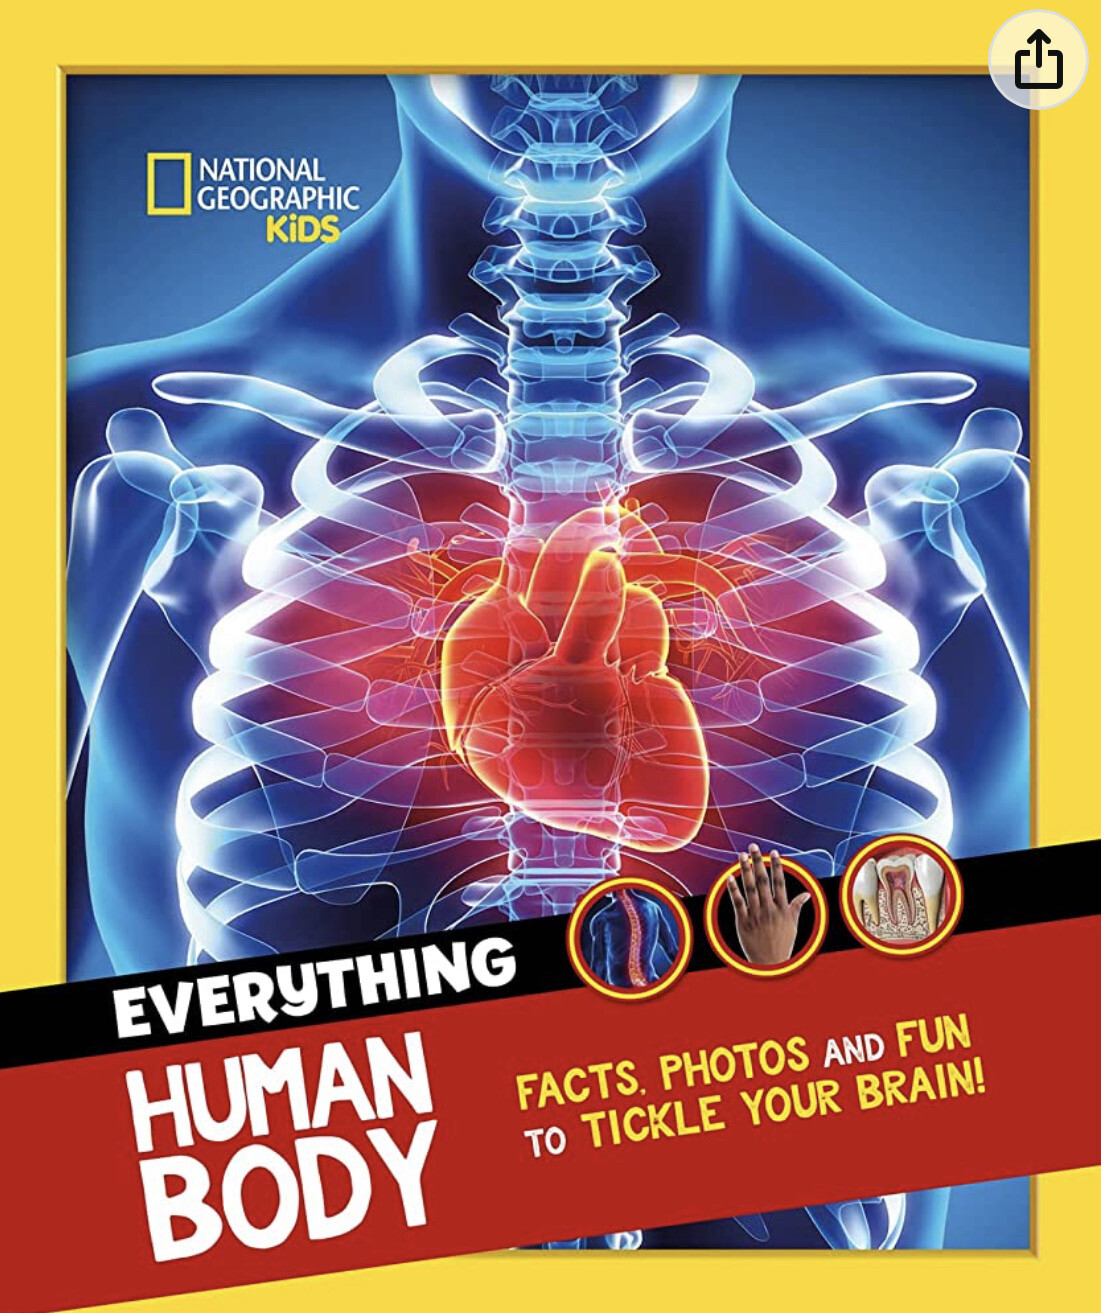 National Geographic Kids. Everything Human Body